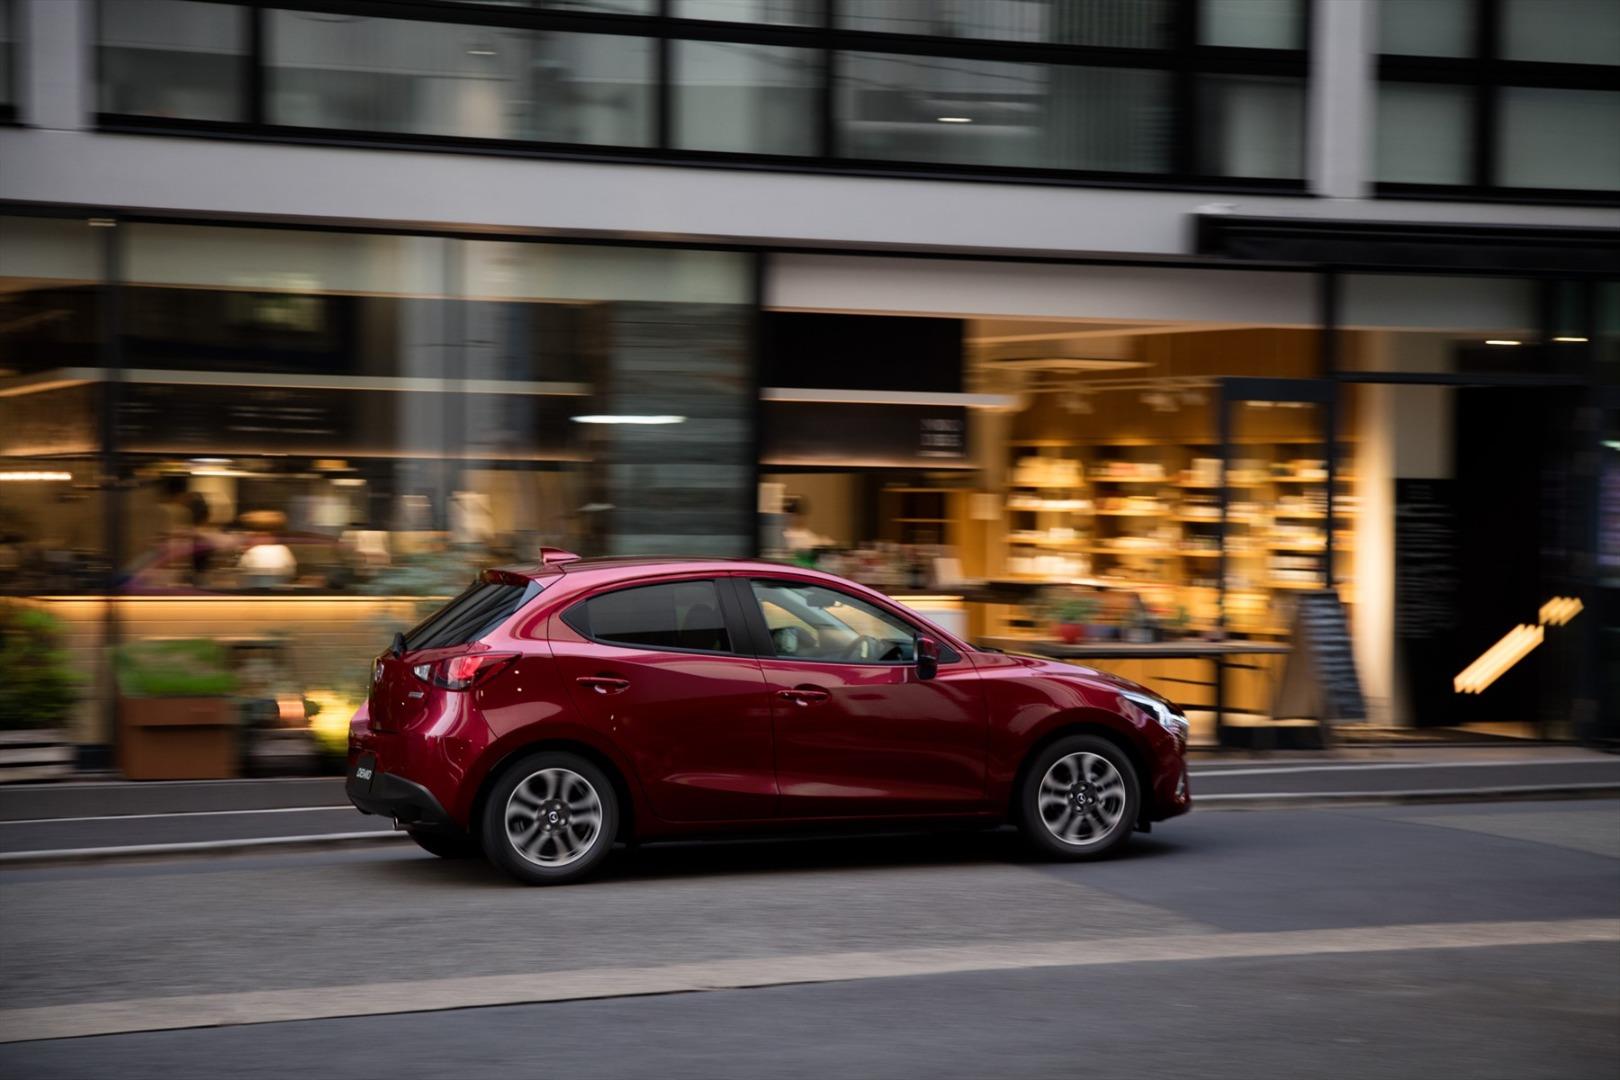 The best official Mazda Mazda2 offers AutoTrader found advertised in